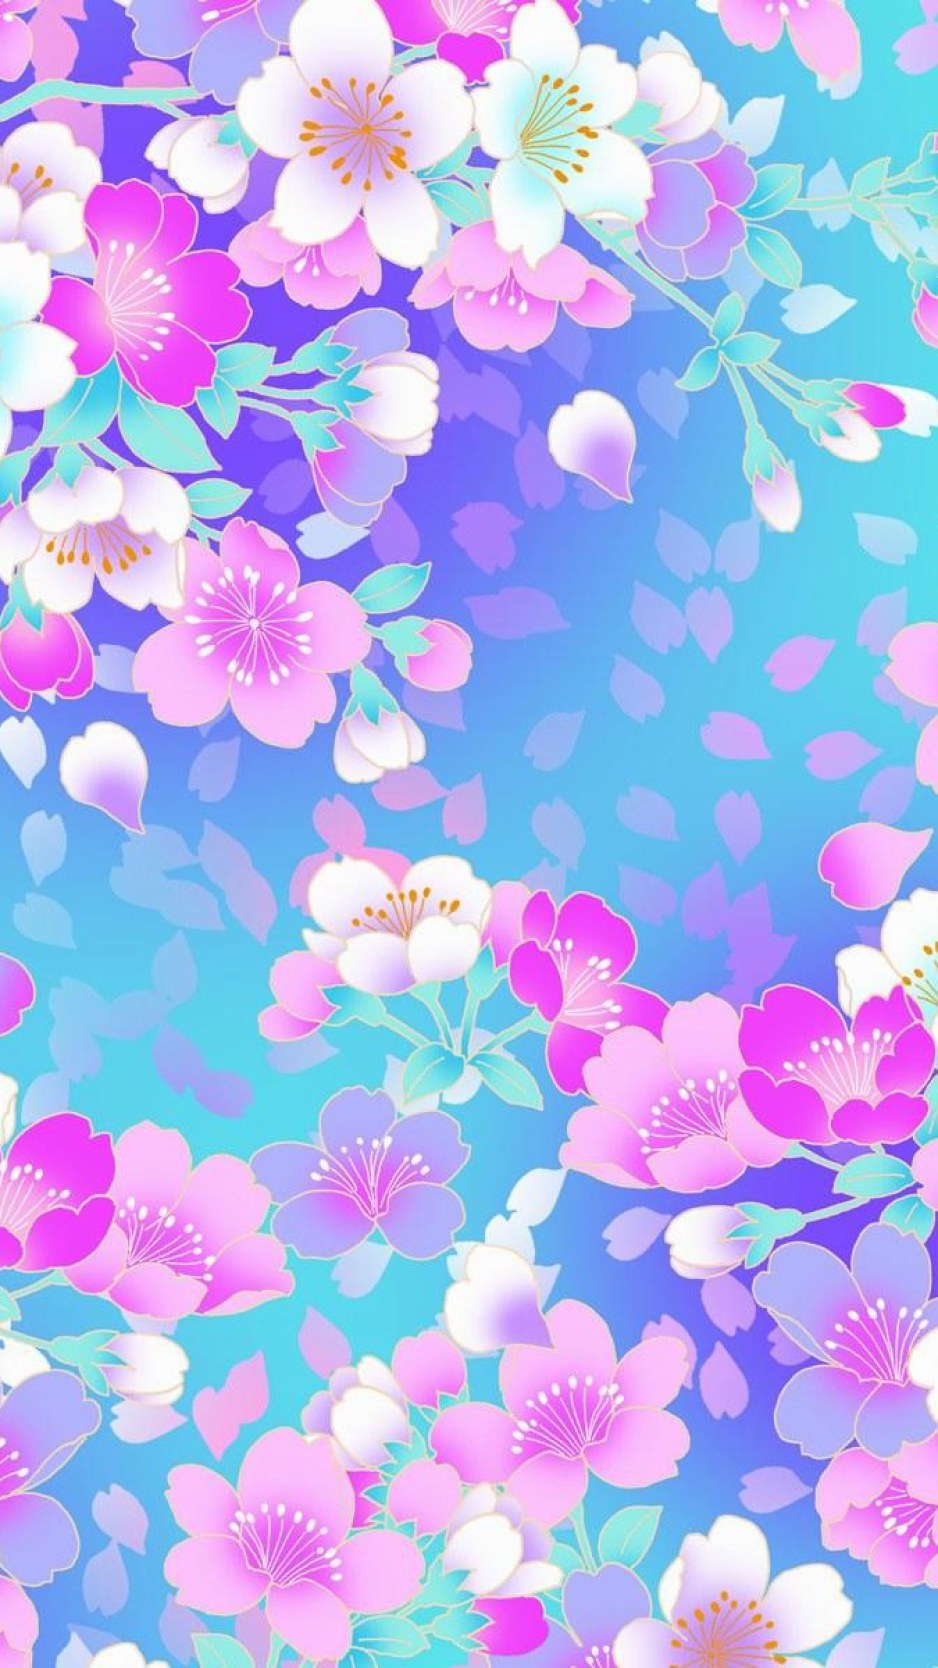 Simple Girly Backgrounds